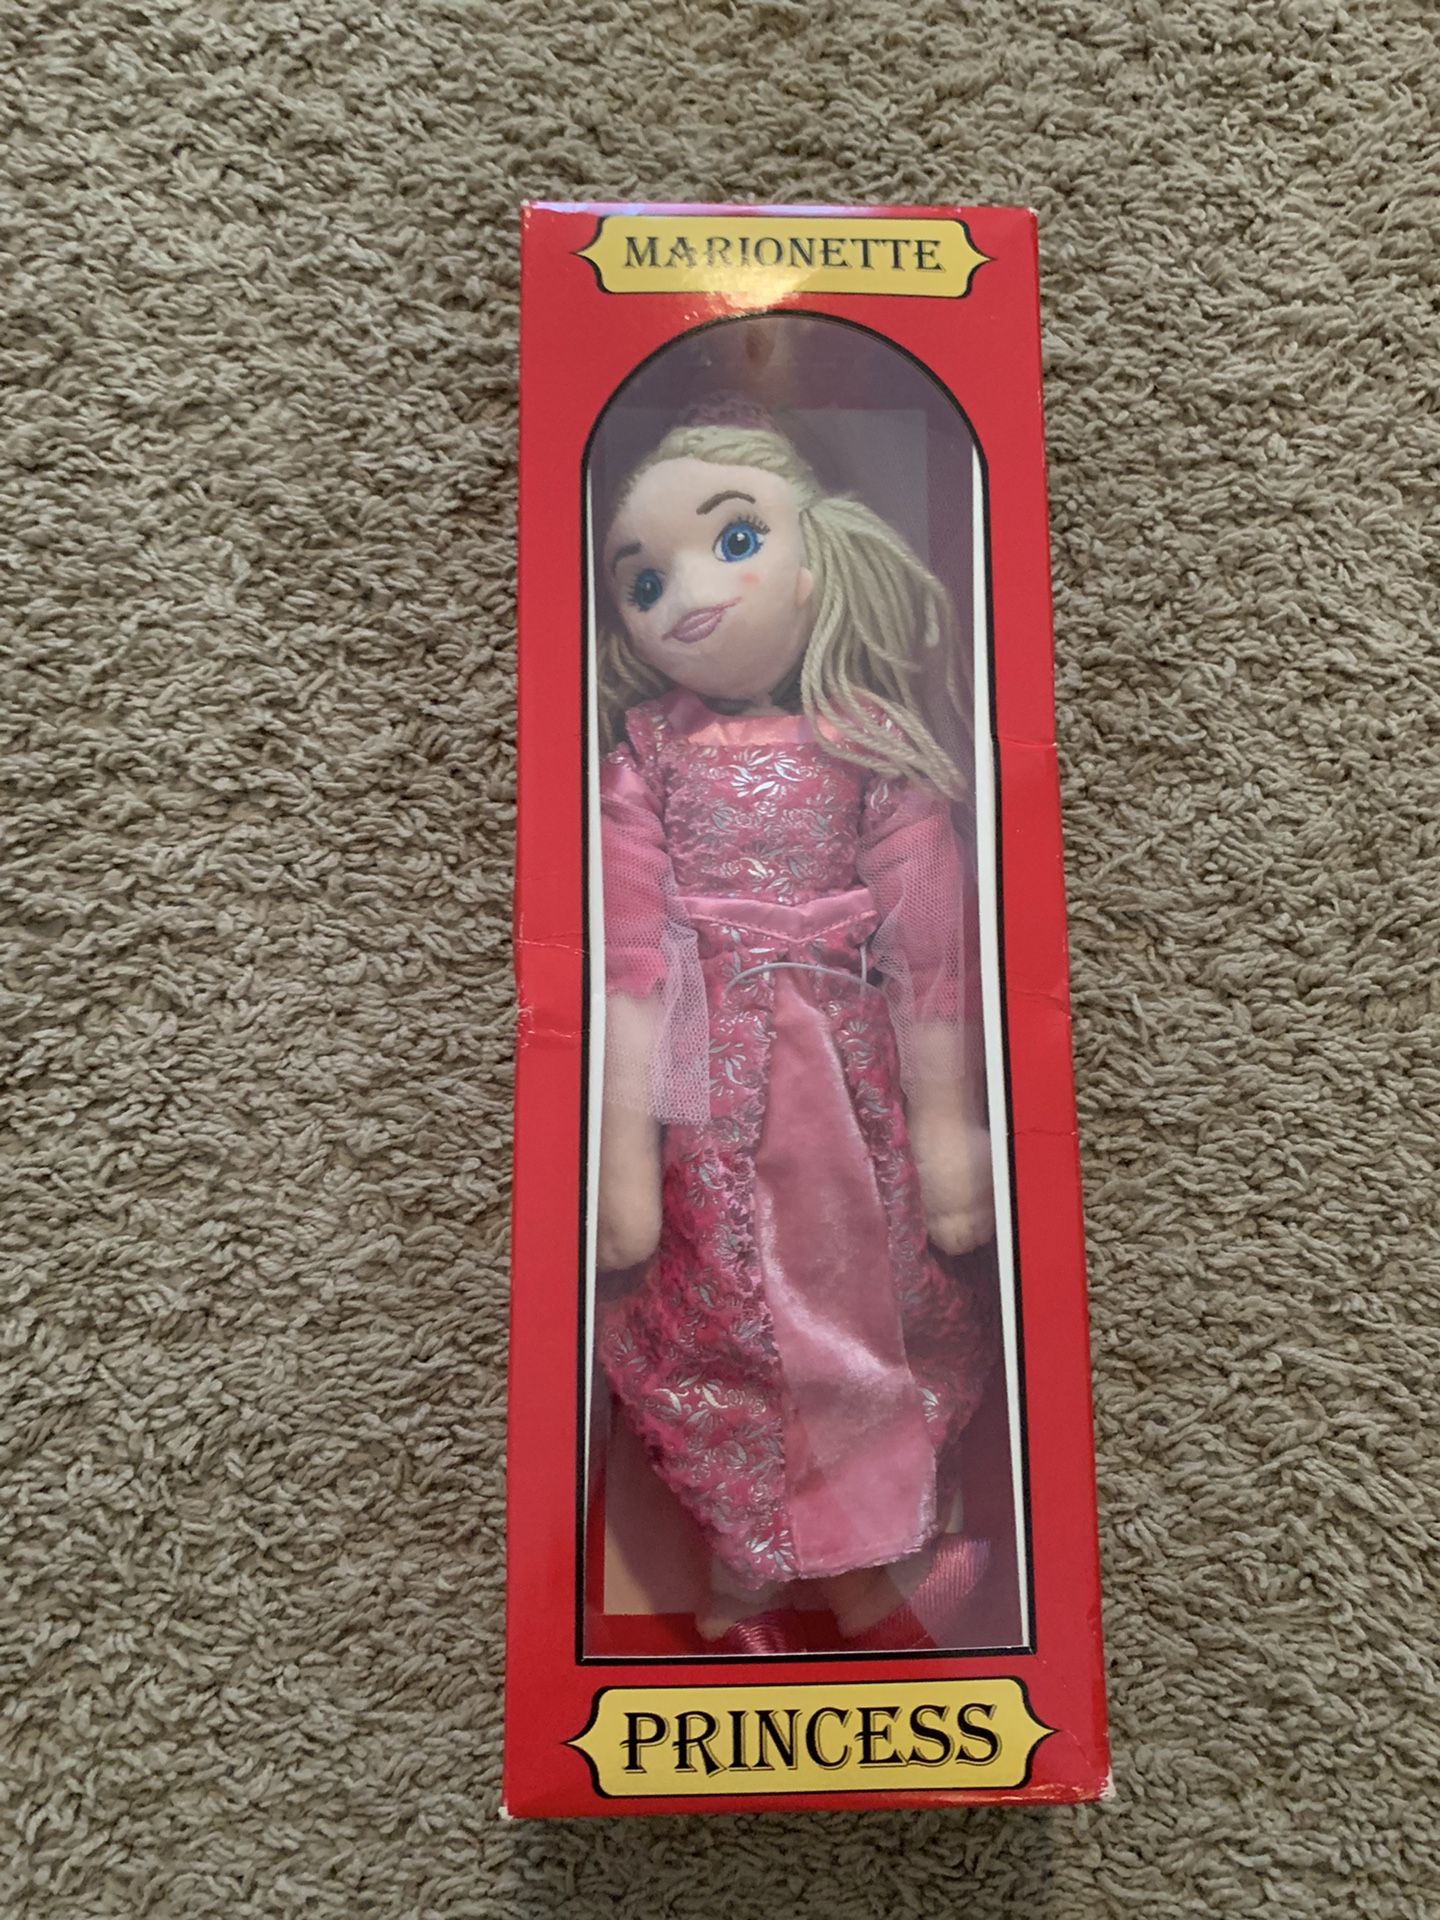 Marionette Doll / Princess Puppet